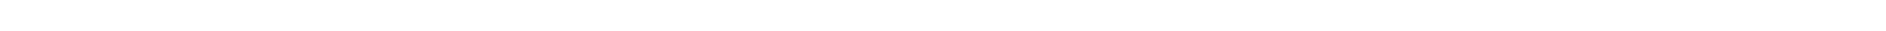 Line with a V in the middle